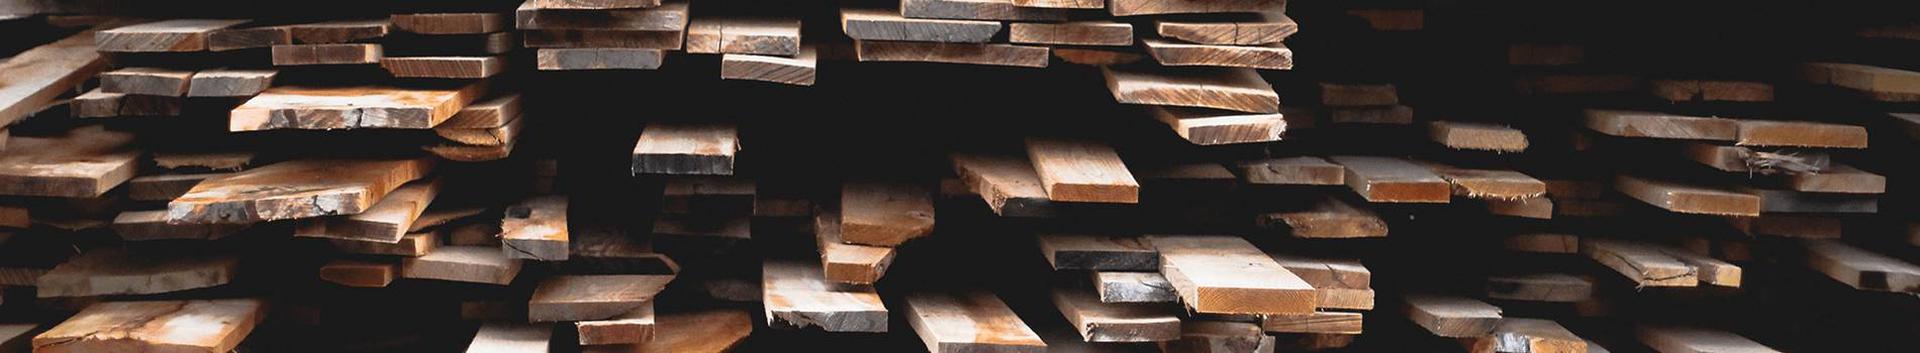 Wood and Paper Industry, wood industry, Sawmills